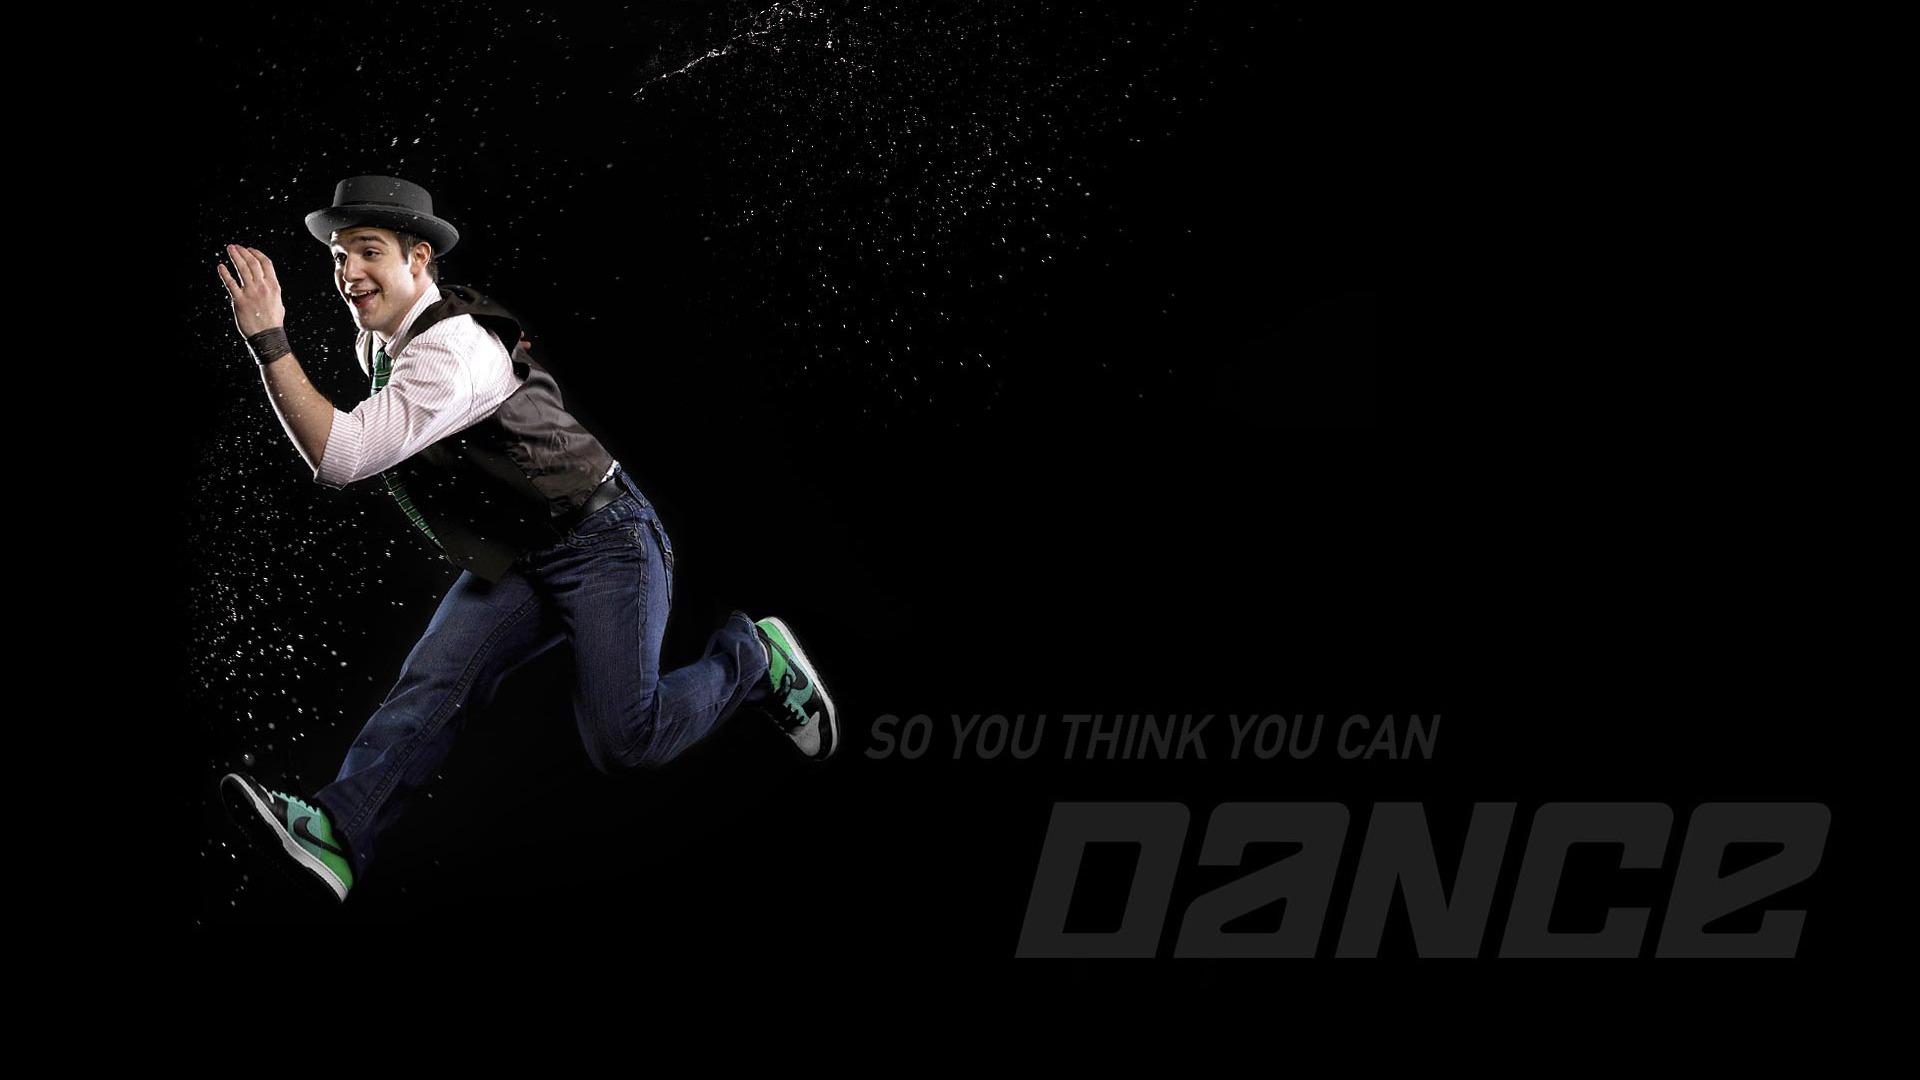 So You Think You Can Dance wallpaper (1) #14 - 1920x1080